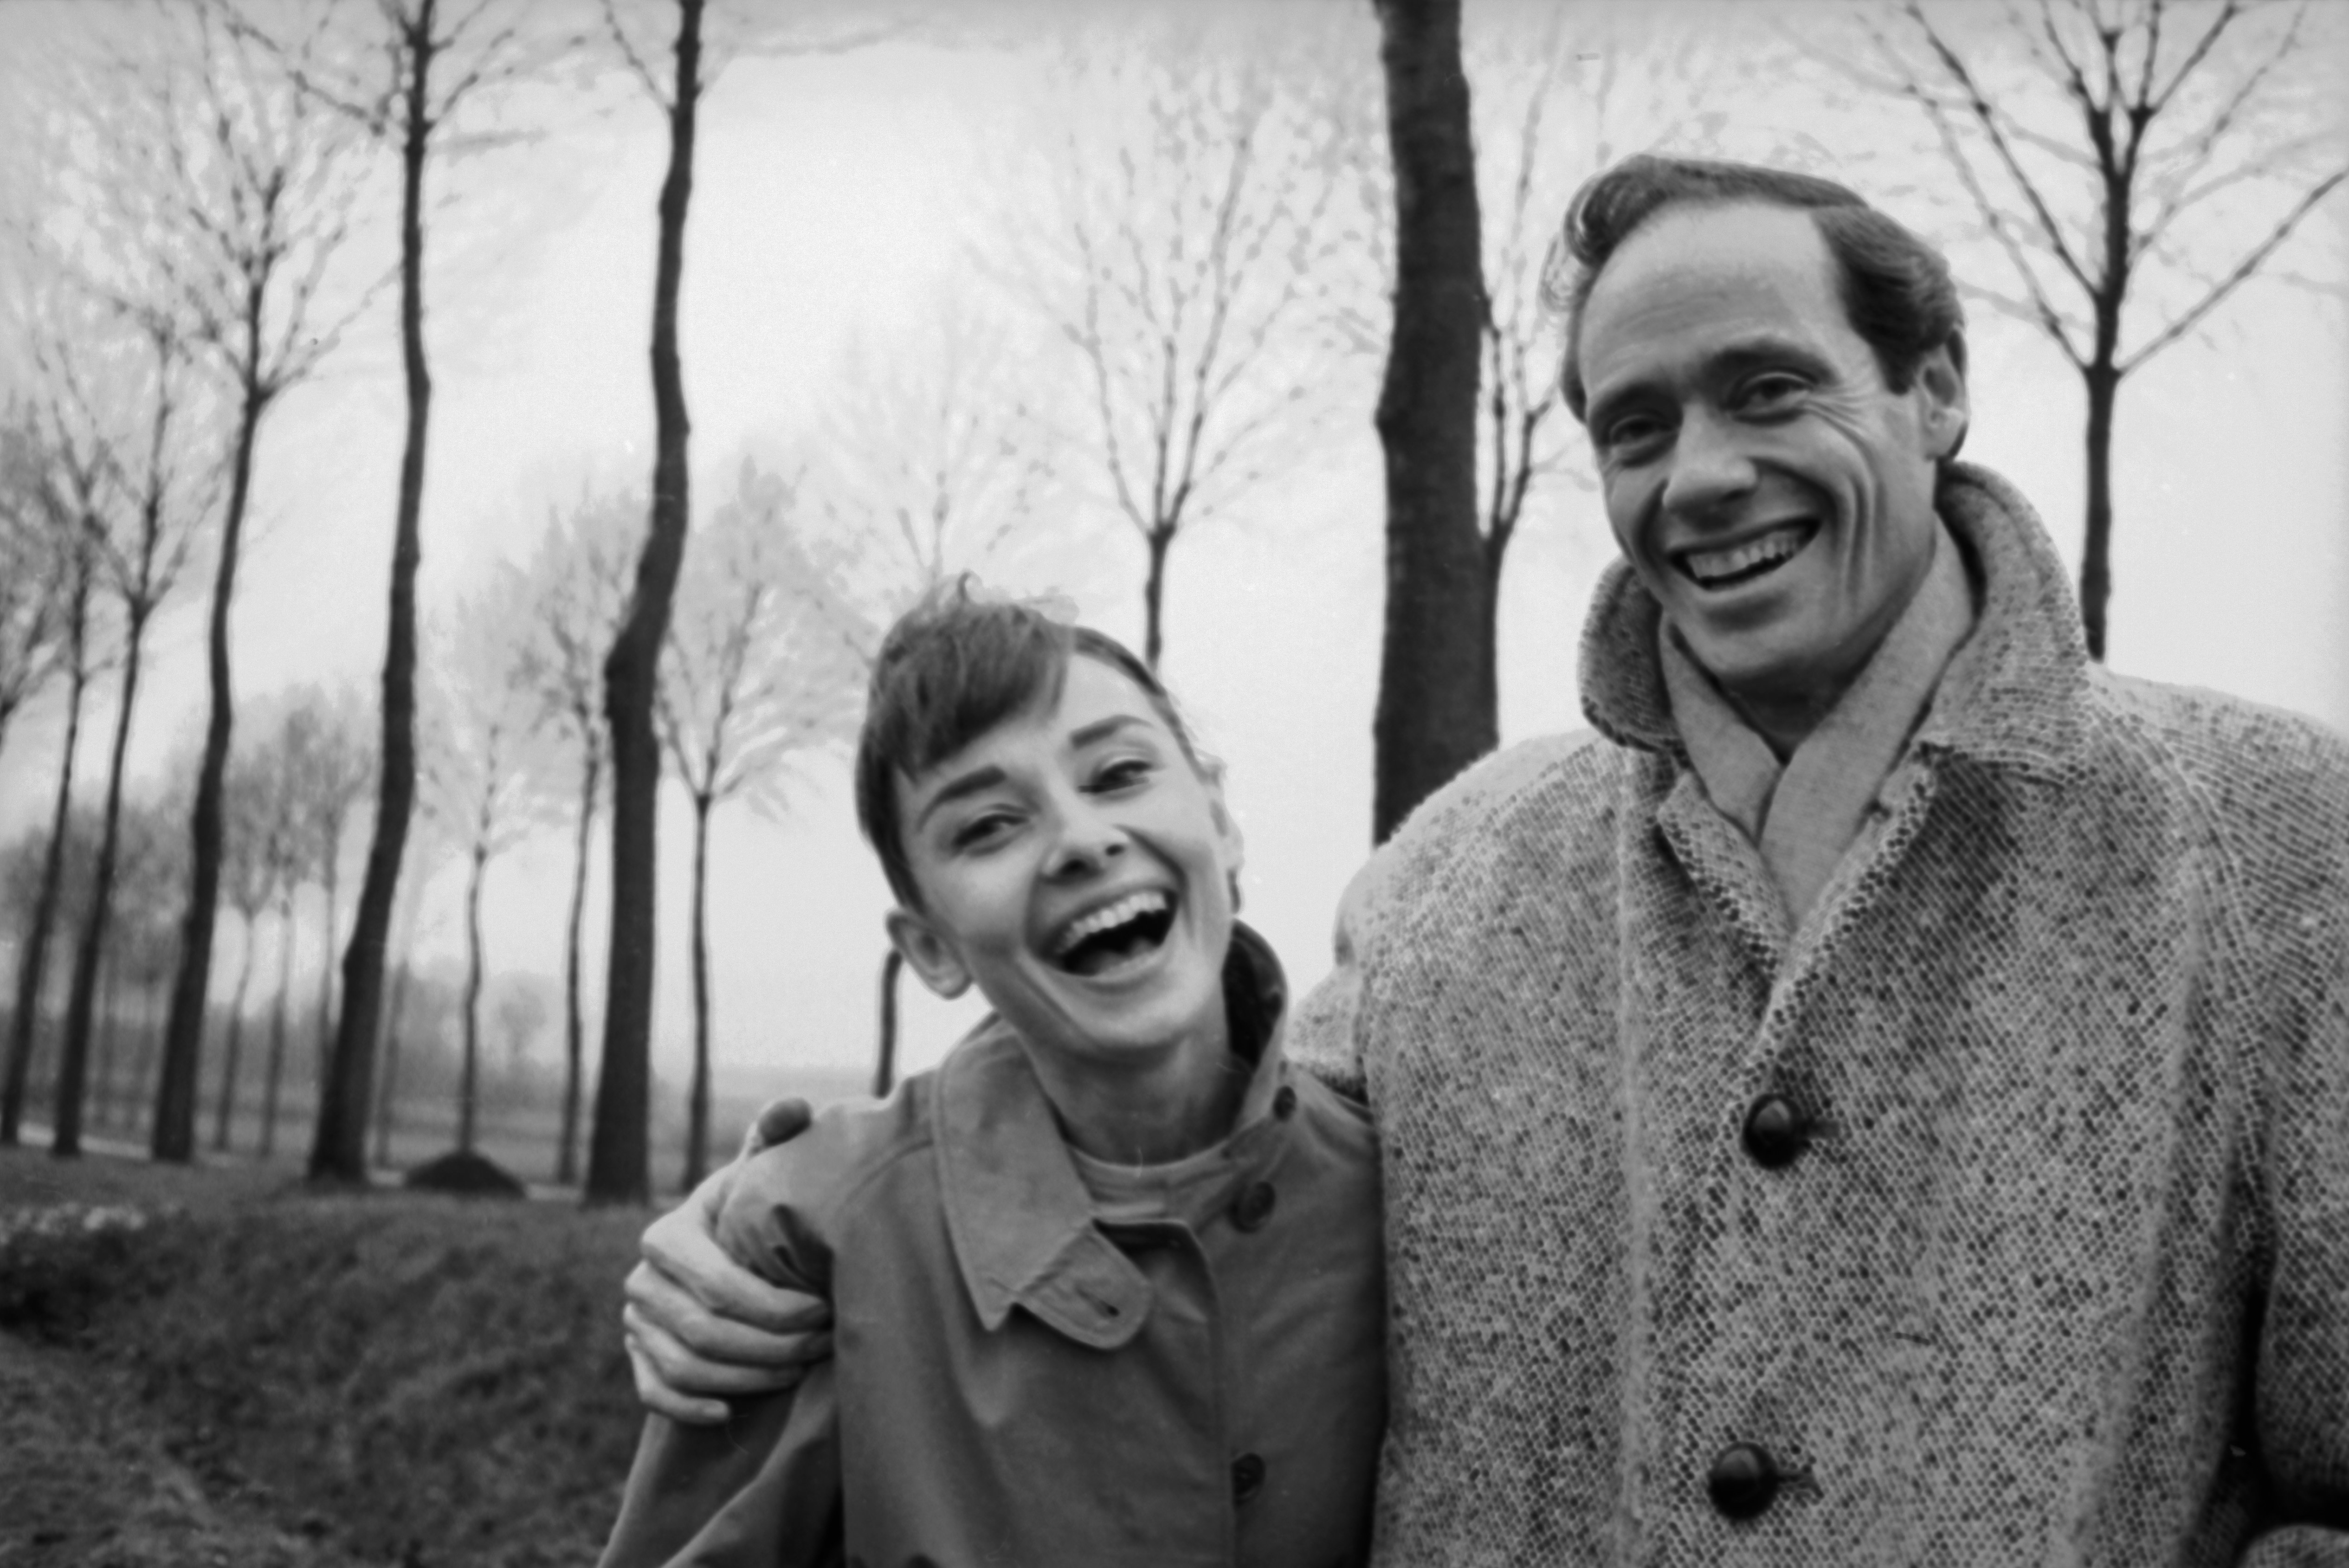 American actor Mel Ferrer (1917 - 2008) buttons up his coat around his wife, actress Audrey Hepburn (1929-1993), on a country road outside Paris, 1956. | Source: Getty Images